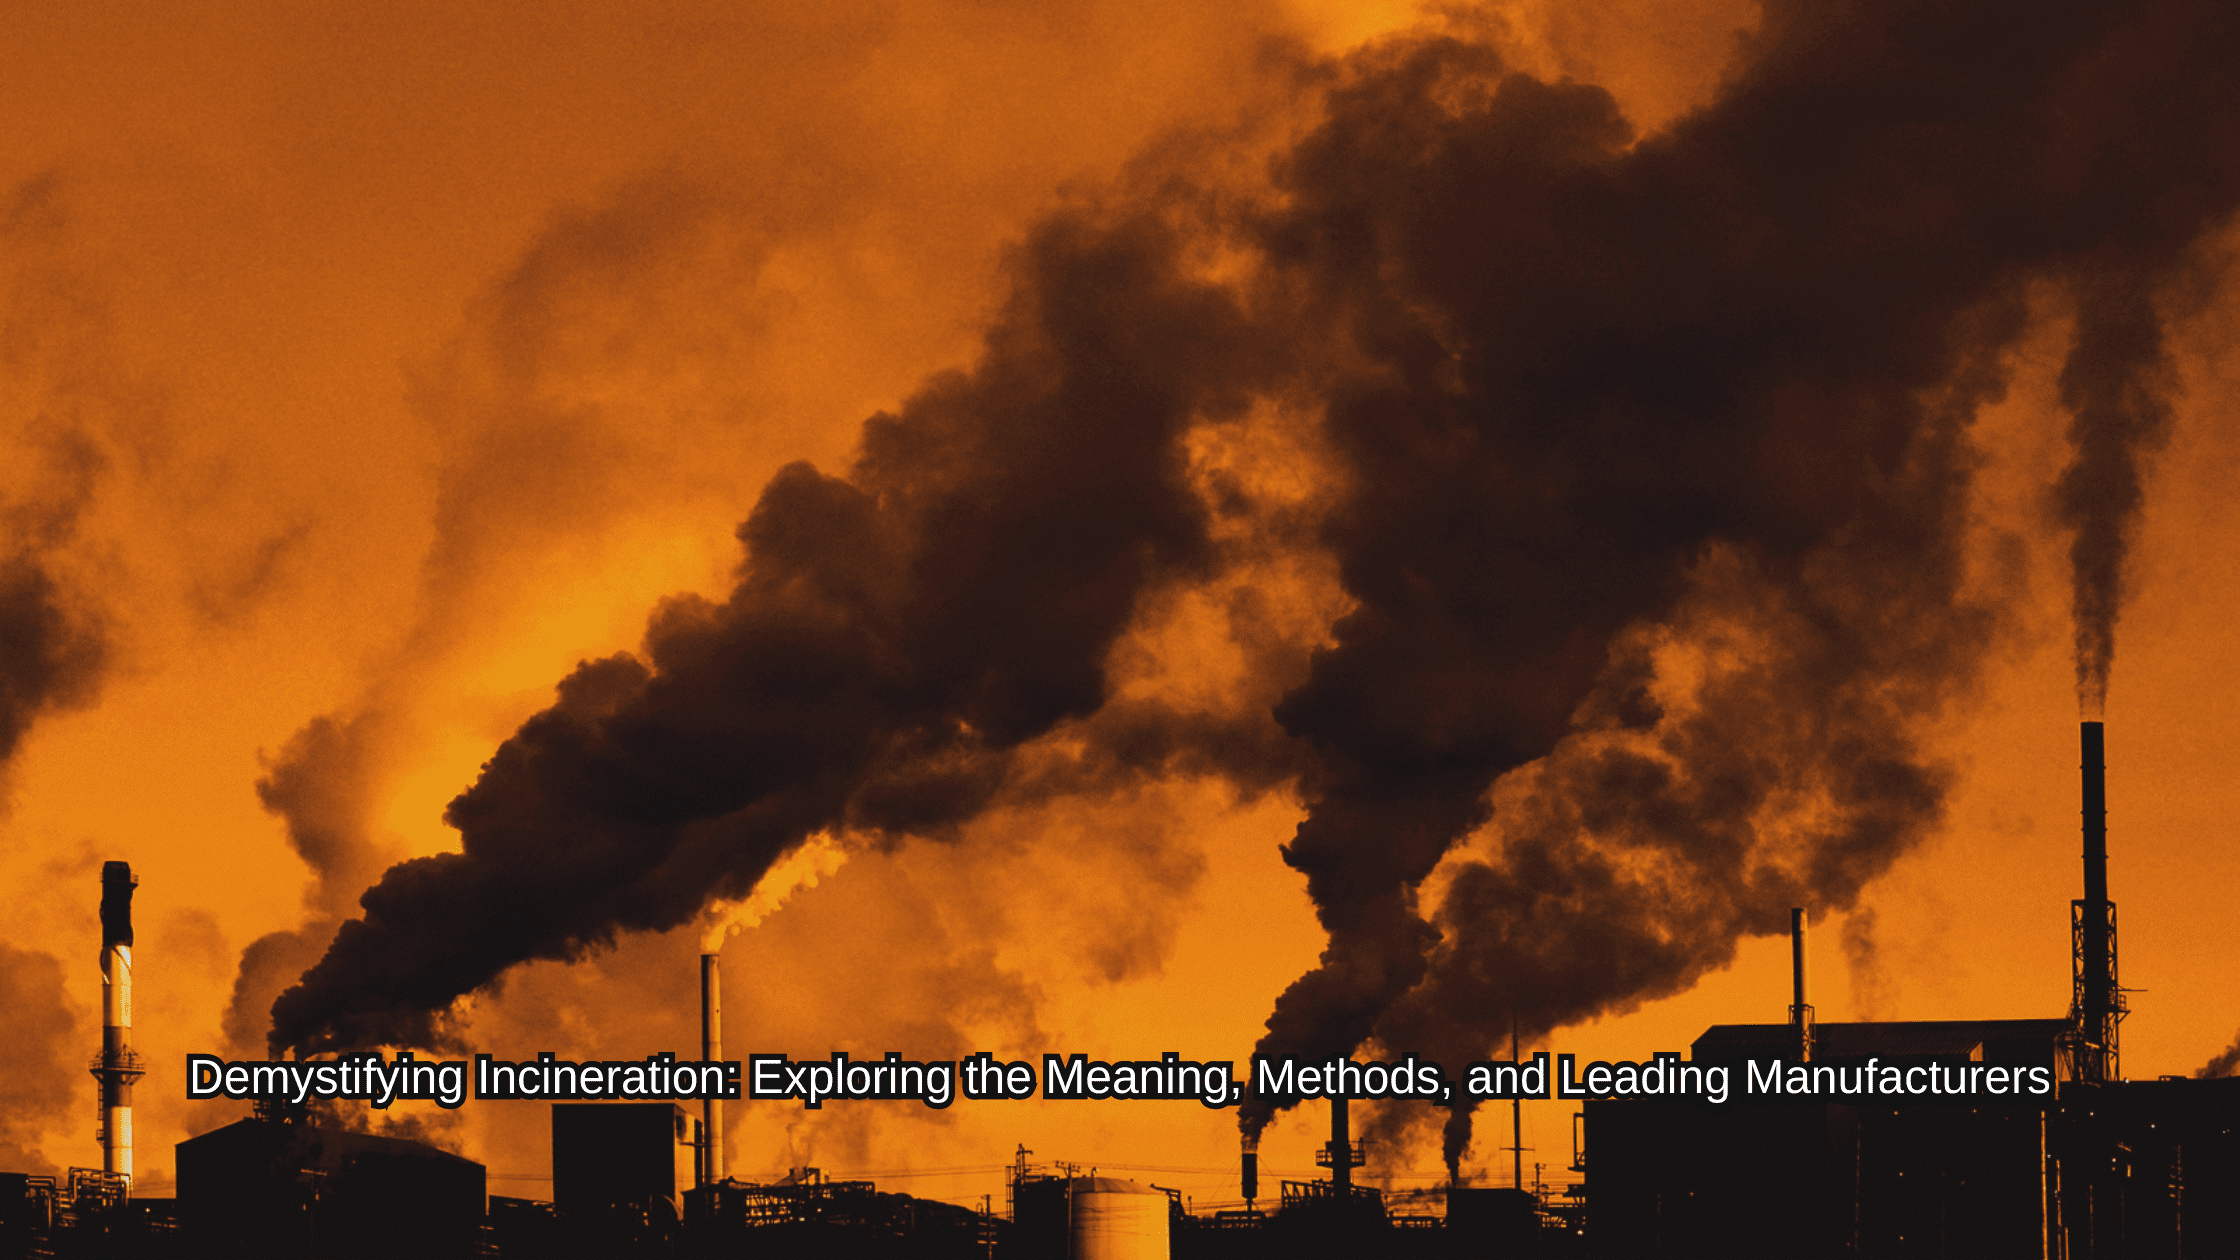 Demystifying Incineration: Exploring the Meaning, Methods, and Leading Manufacturers